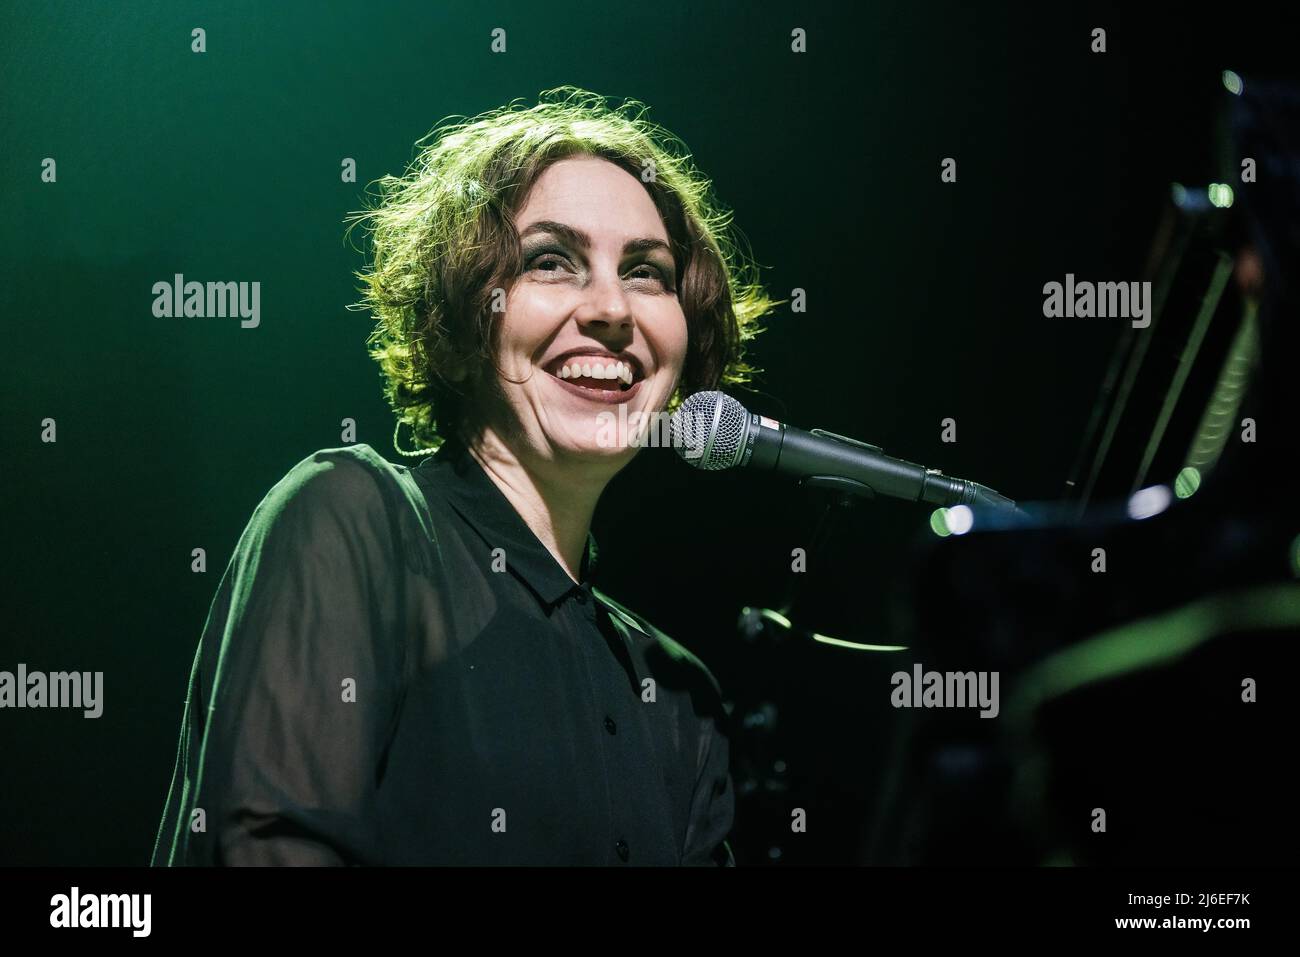 Tilburg, Netherlands. 23rd, April 2022. The American singer, musician and composer Emma Ruth Rundle performs a live concert during the Dutch music festival Roadburn Festival 2022 in Tilburg. (Photo credit: Gonzales Photo - Peter Troest). Stock Photo